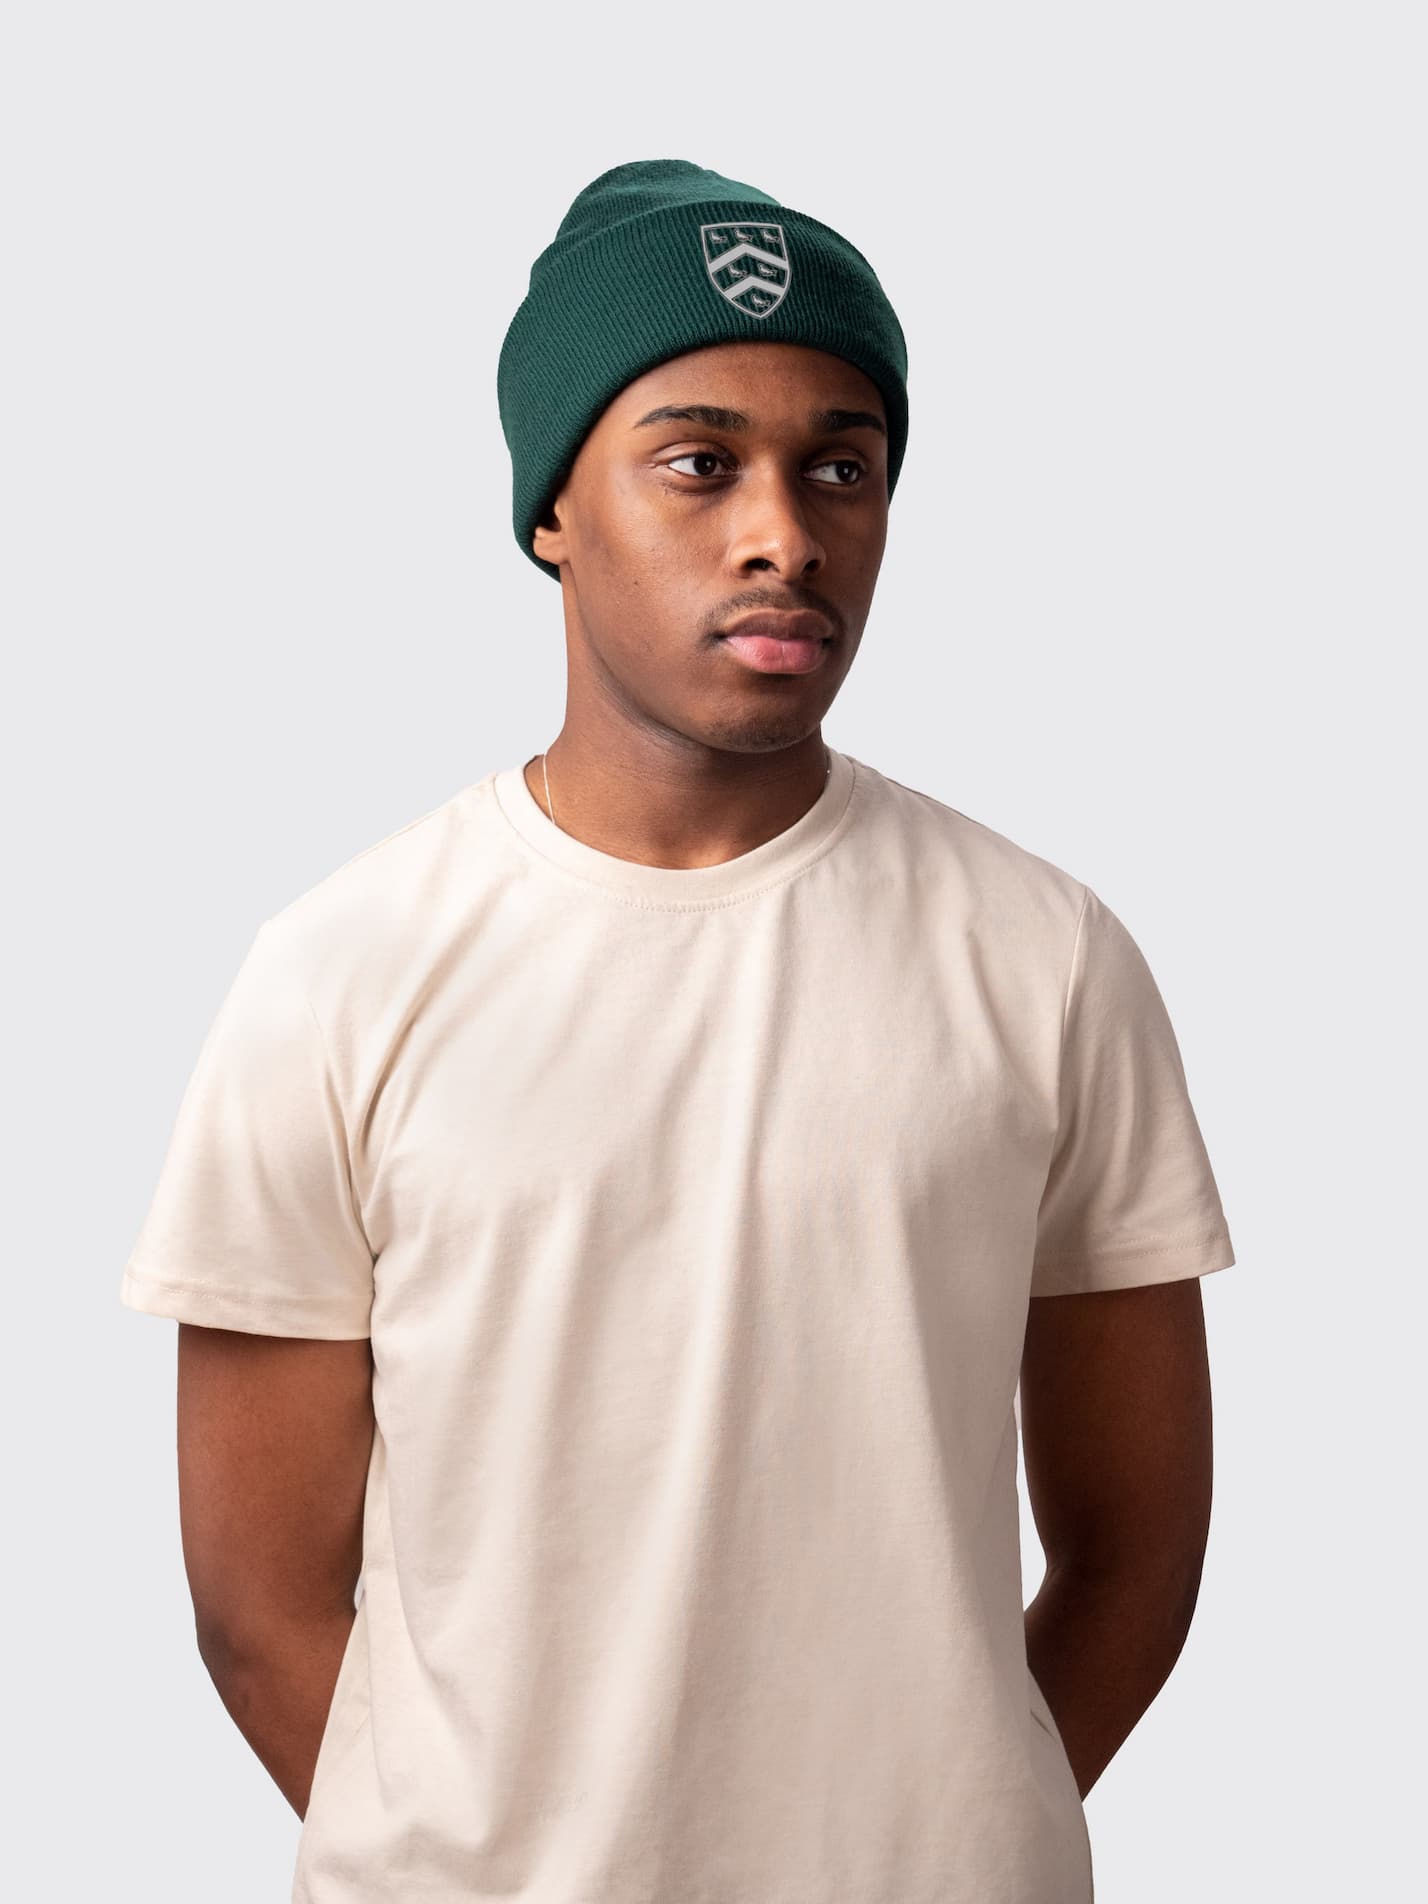 Bottle green, double layer knit beanie, made from sustainable yarn